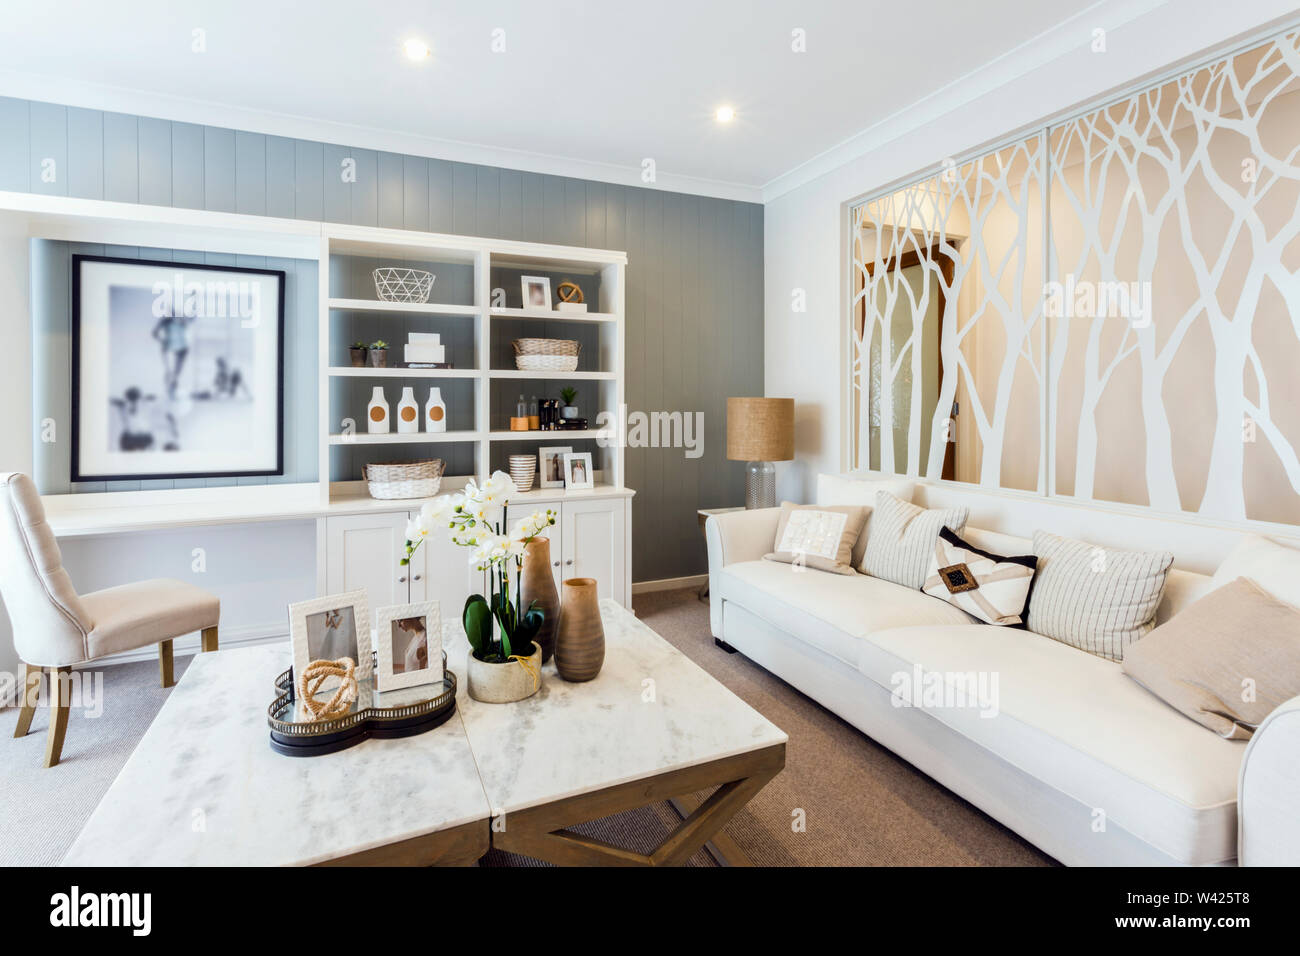 A Blending Dcor With Shades Of White And Ochre In The Living Room White Sofa And White Showcase With A Designer Glass Partition Stock Photo Alamy